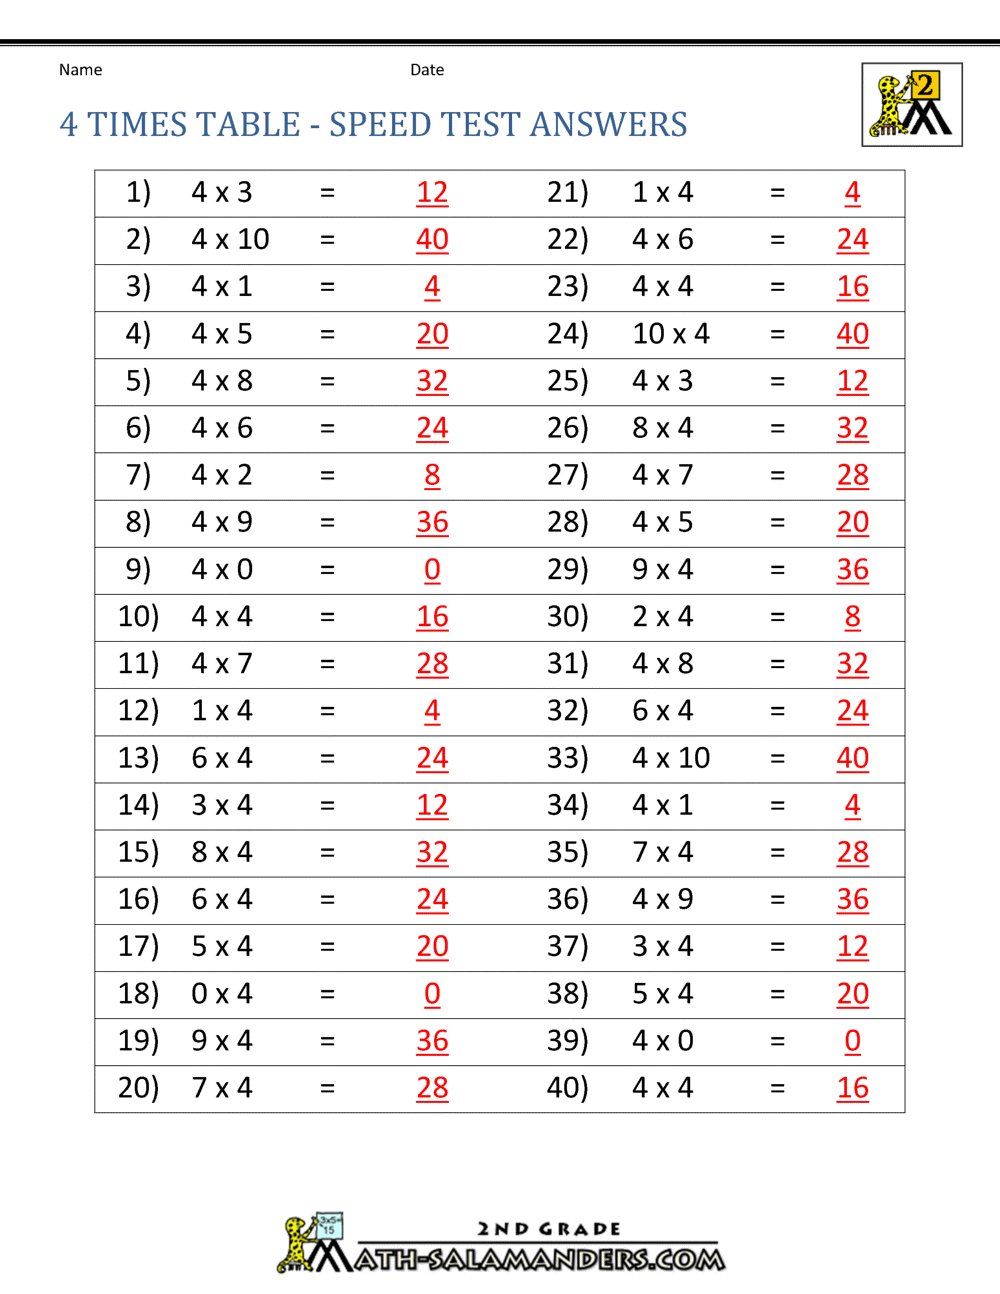 4 times table up to 100